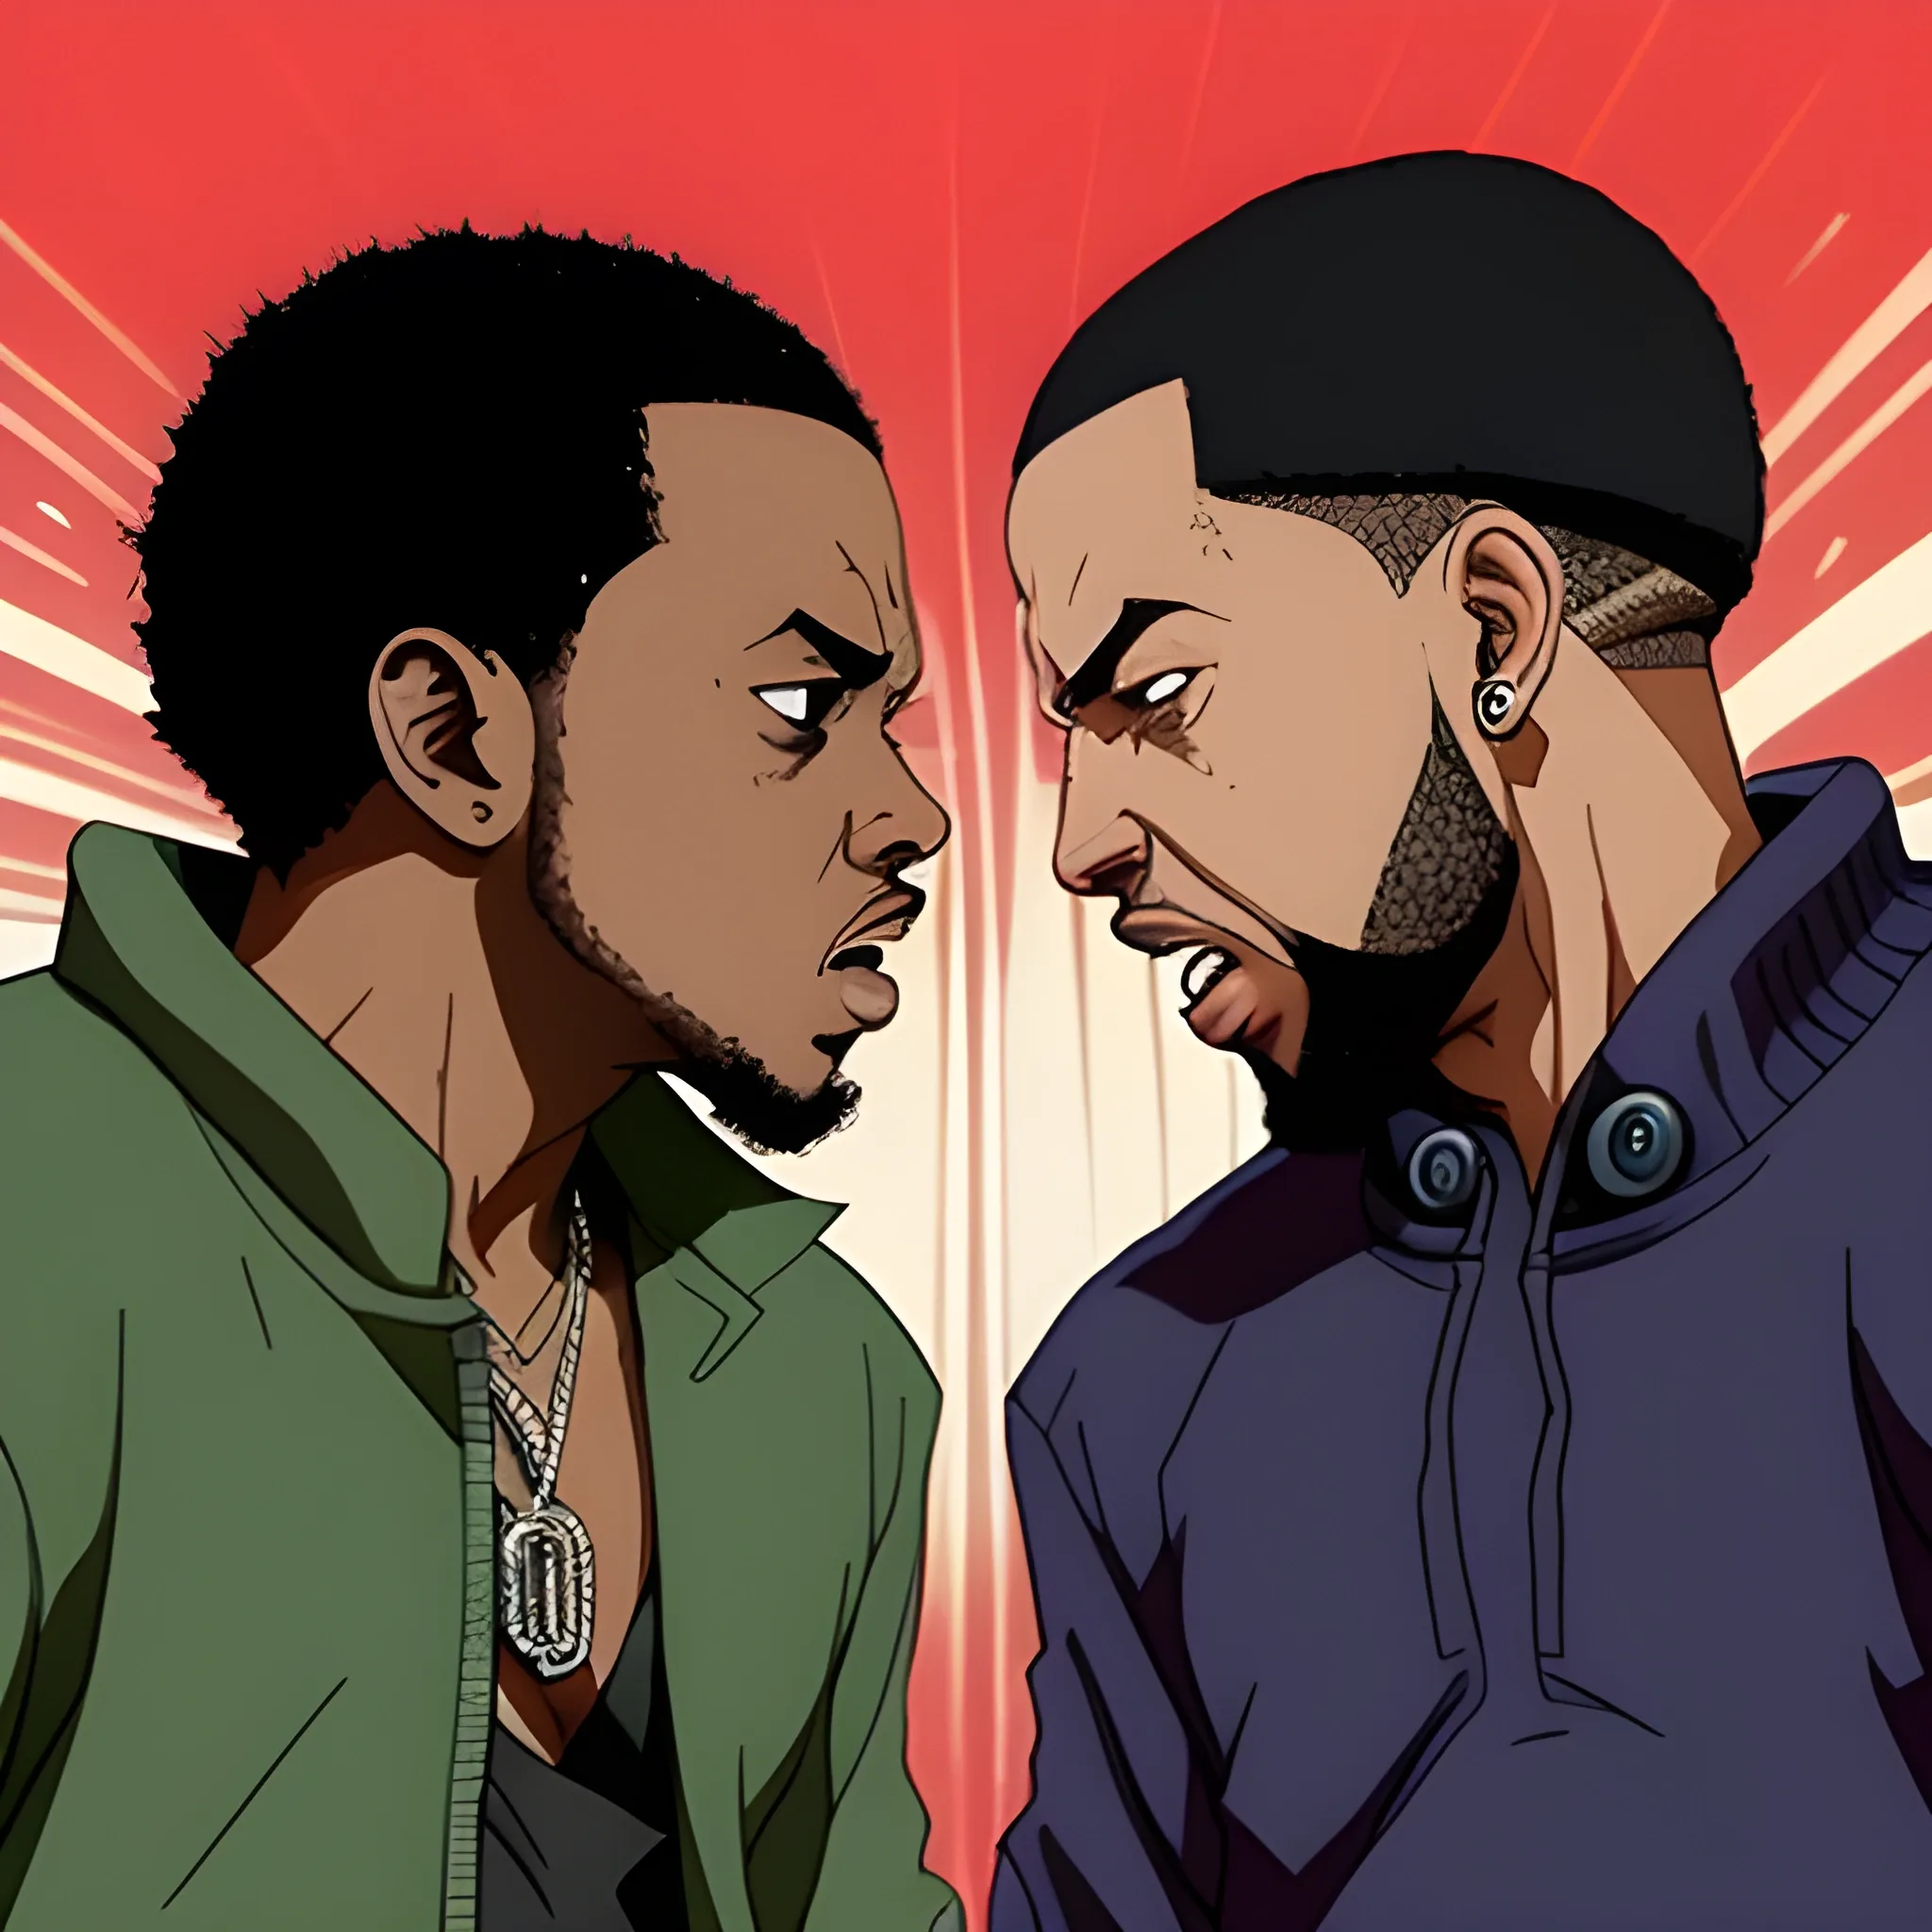 kendrick lamar and drake fighting in an epic boondocks-style fight